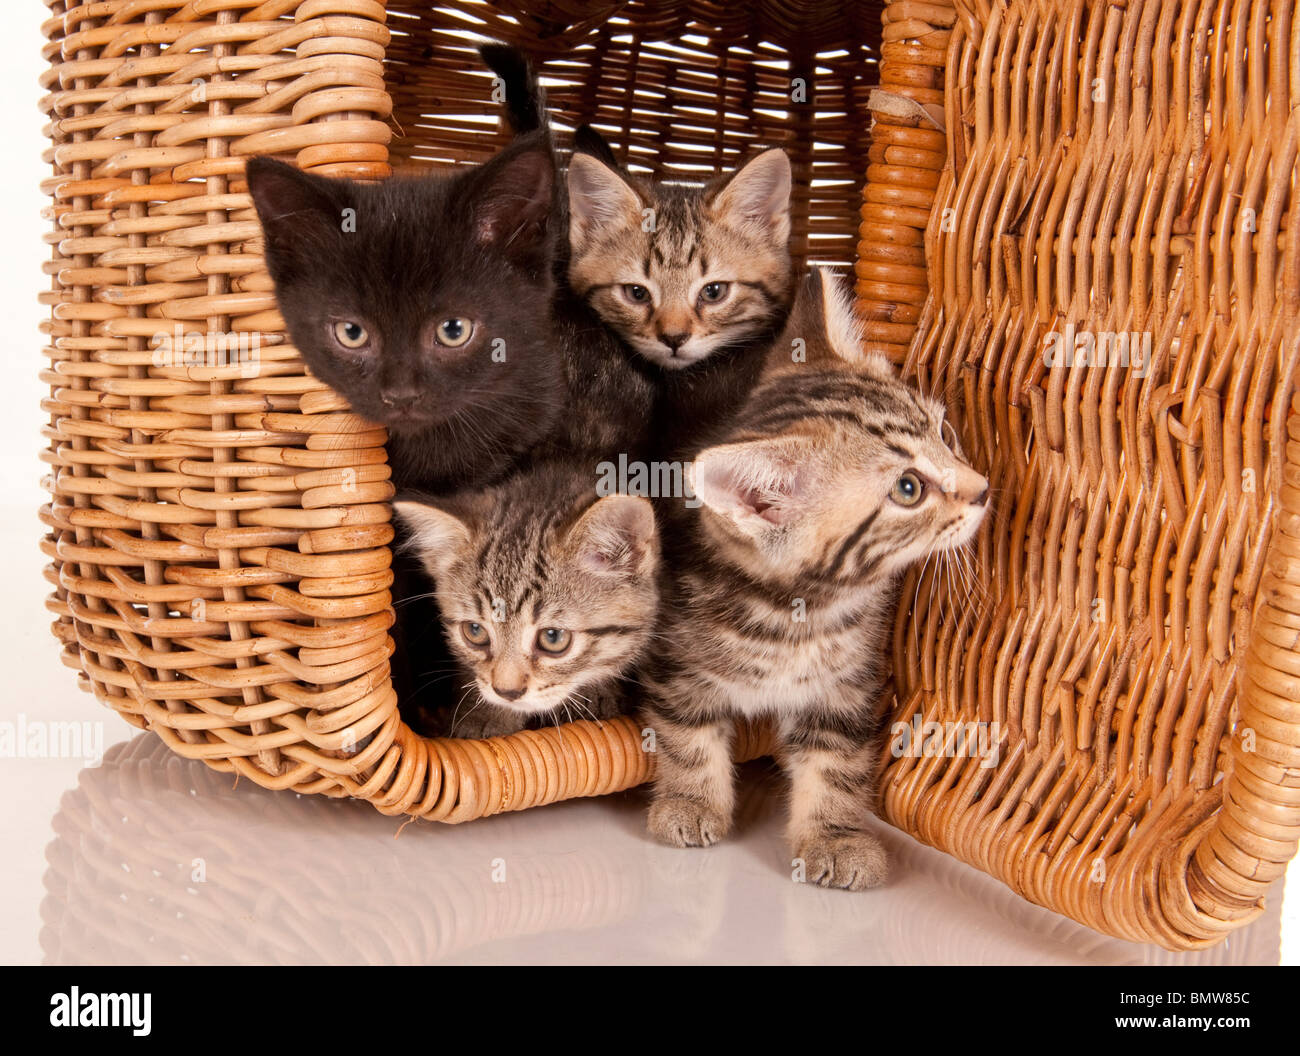 four 4 curious gray and black kittens peeking out of a picnic basket Stock Photo